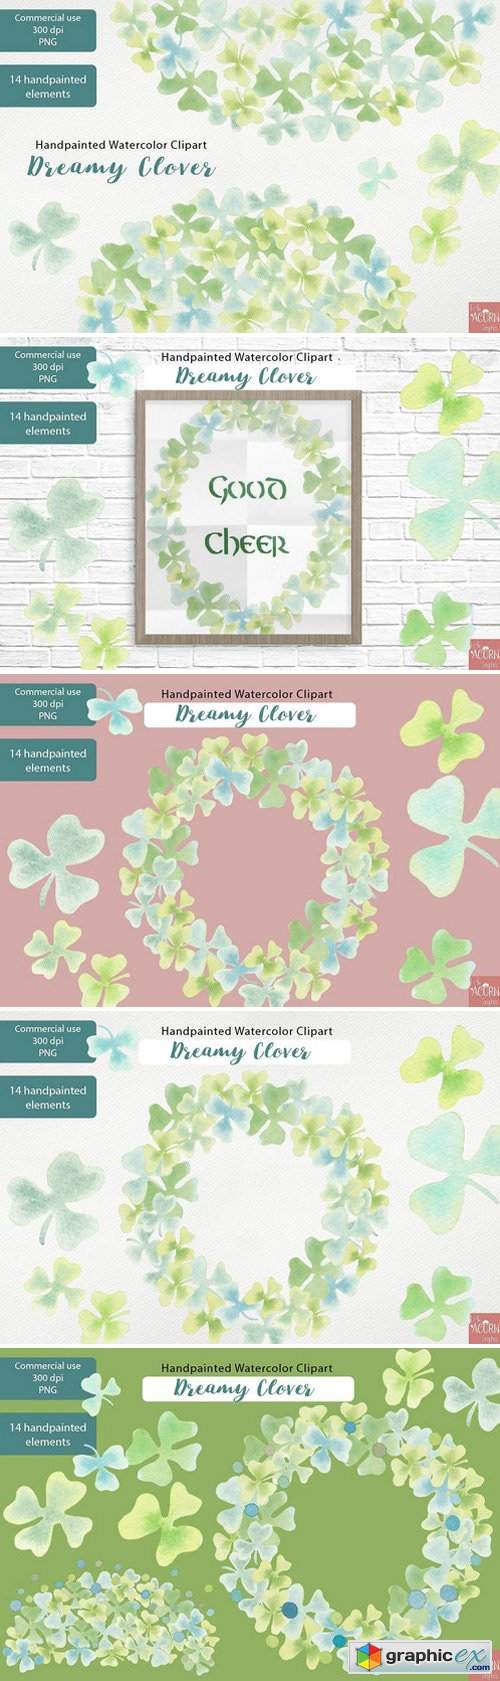 Watercolor Clipart Dreamy Clover PNG